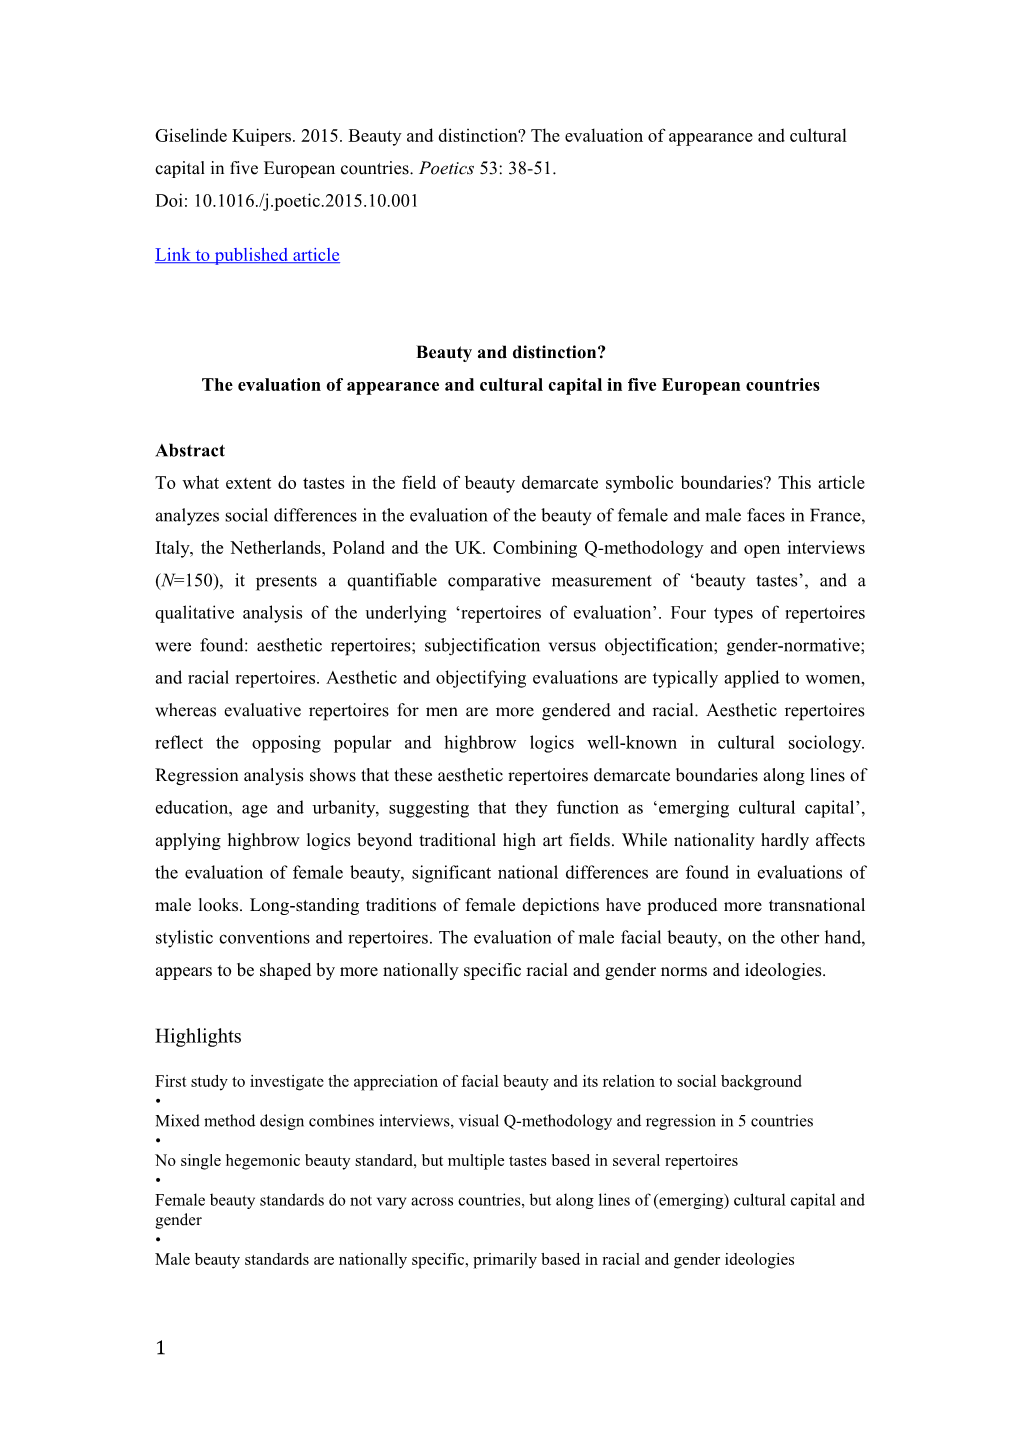 The Evaluation of Appearance and Cultural Capital in Five European Countries